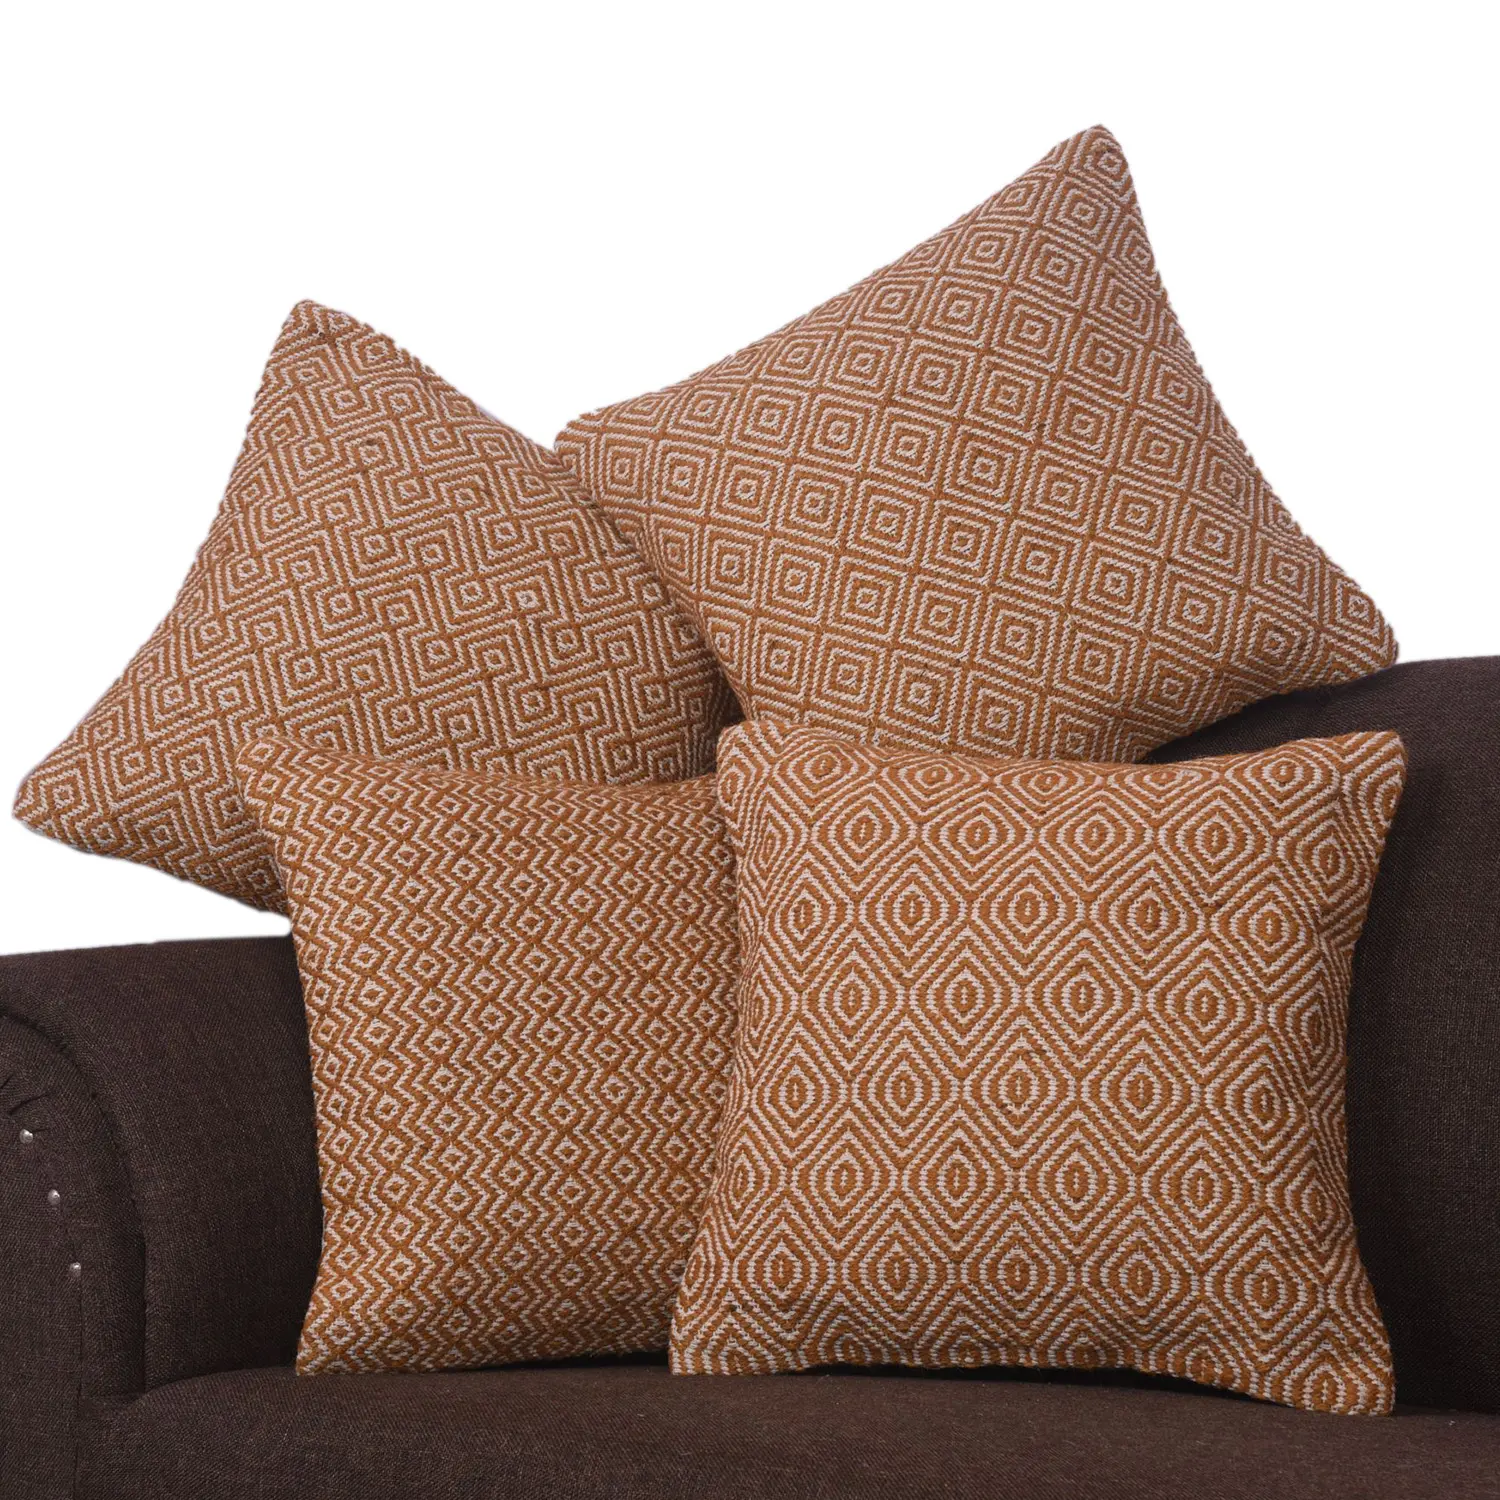 BOHEMIAN COTTON JUTE TUFTED 4 YELLOW PILLOW SET THROW PILLOW COVERS HOME DECORATIVE INDIAN MOROCCAN PILLOWCASES FOR SOFA BED